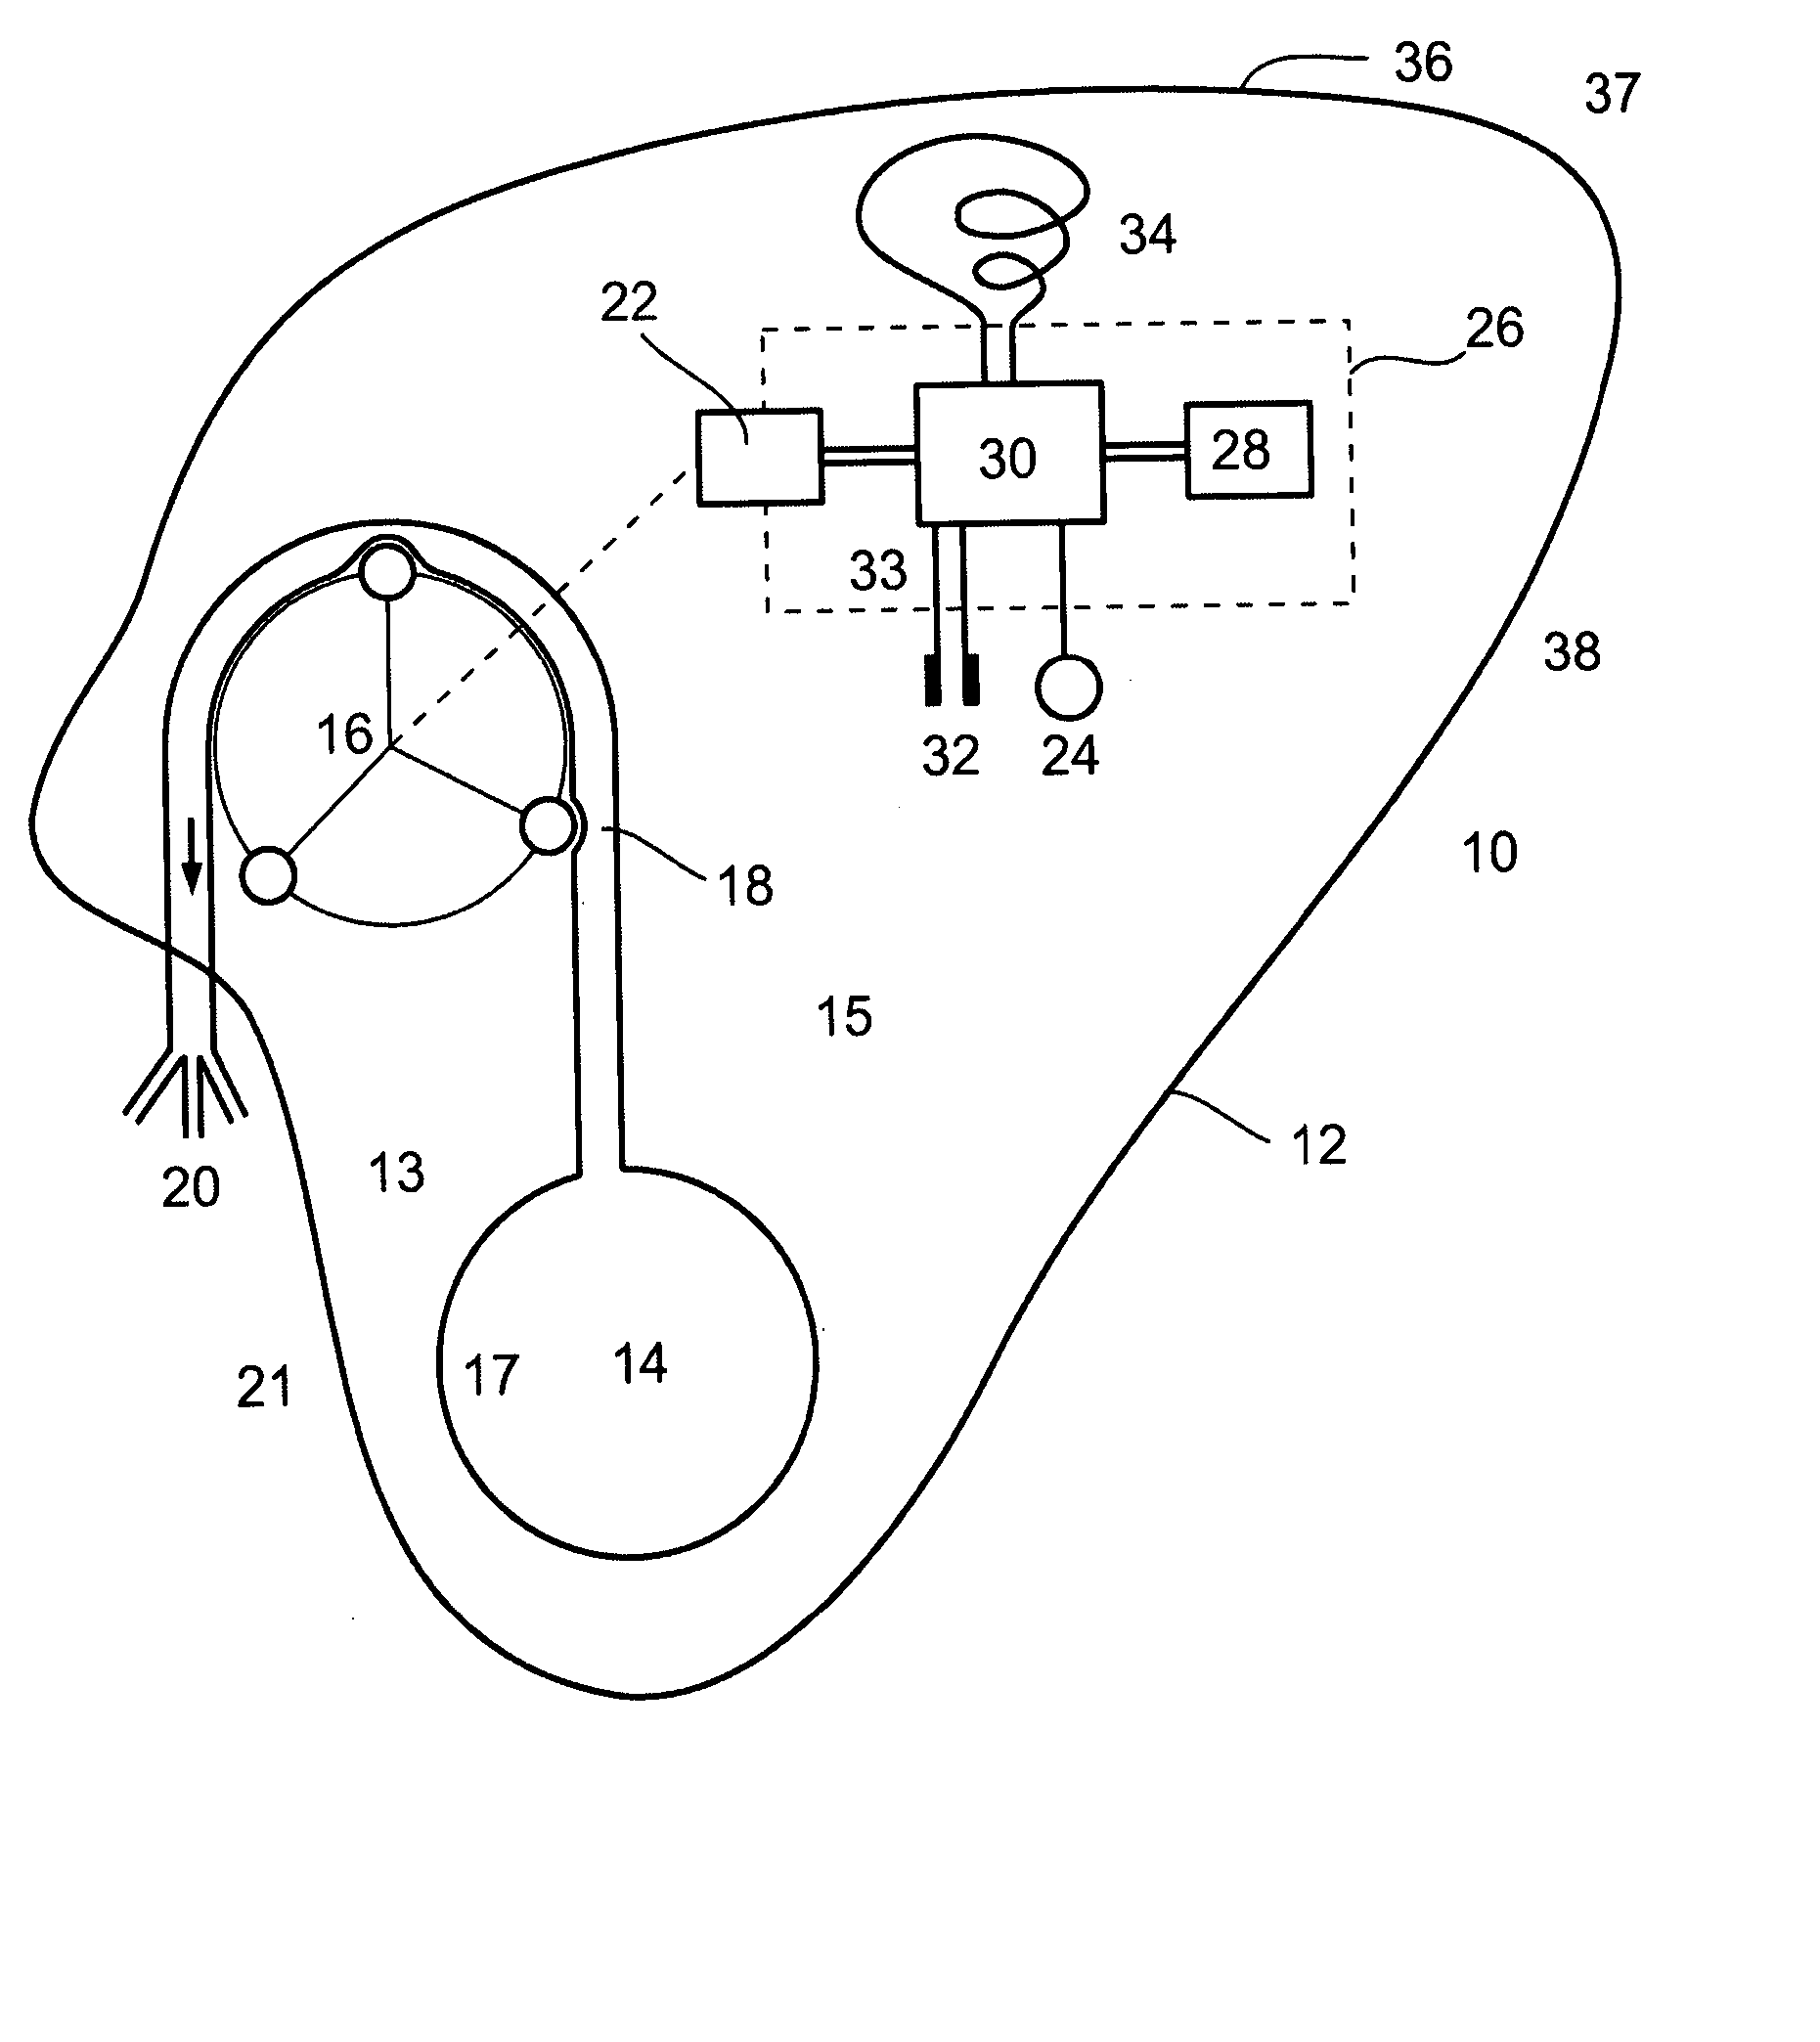 Device and Method for Treating Weight Disorders